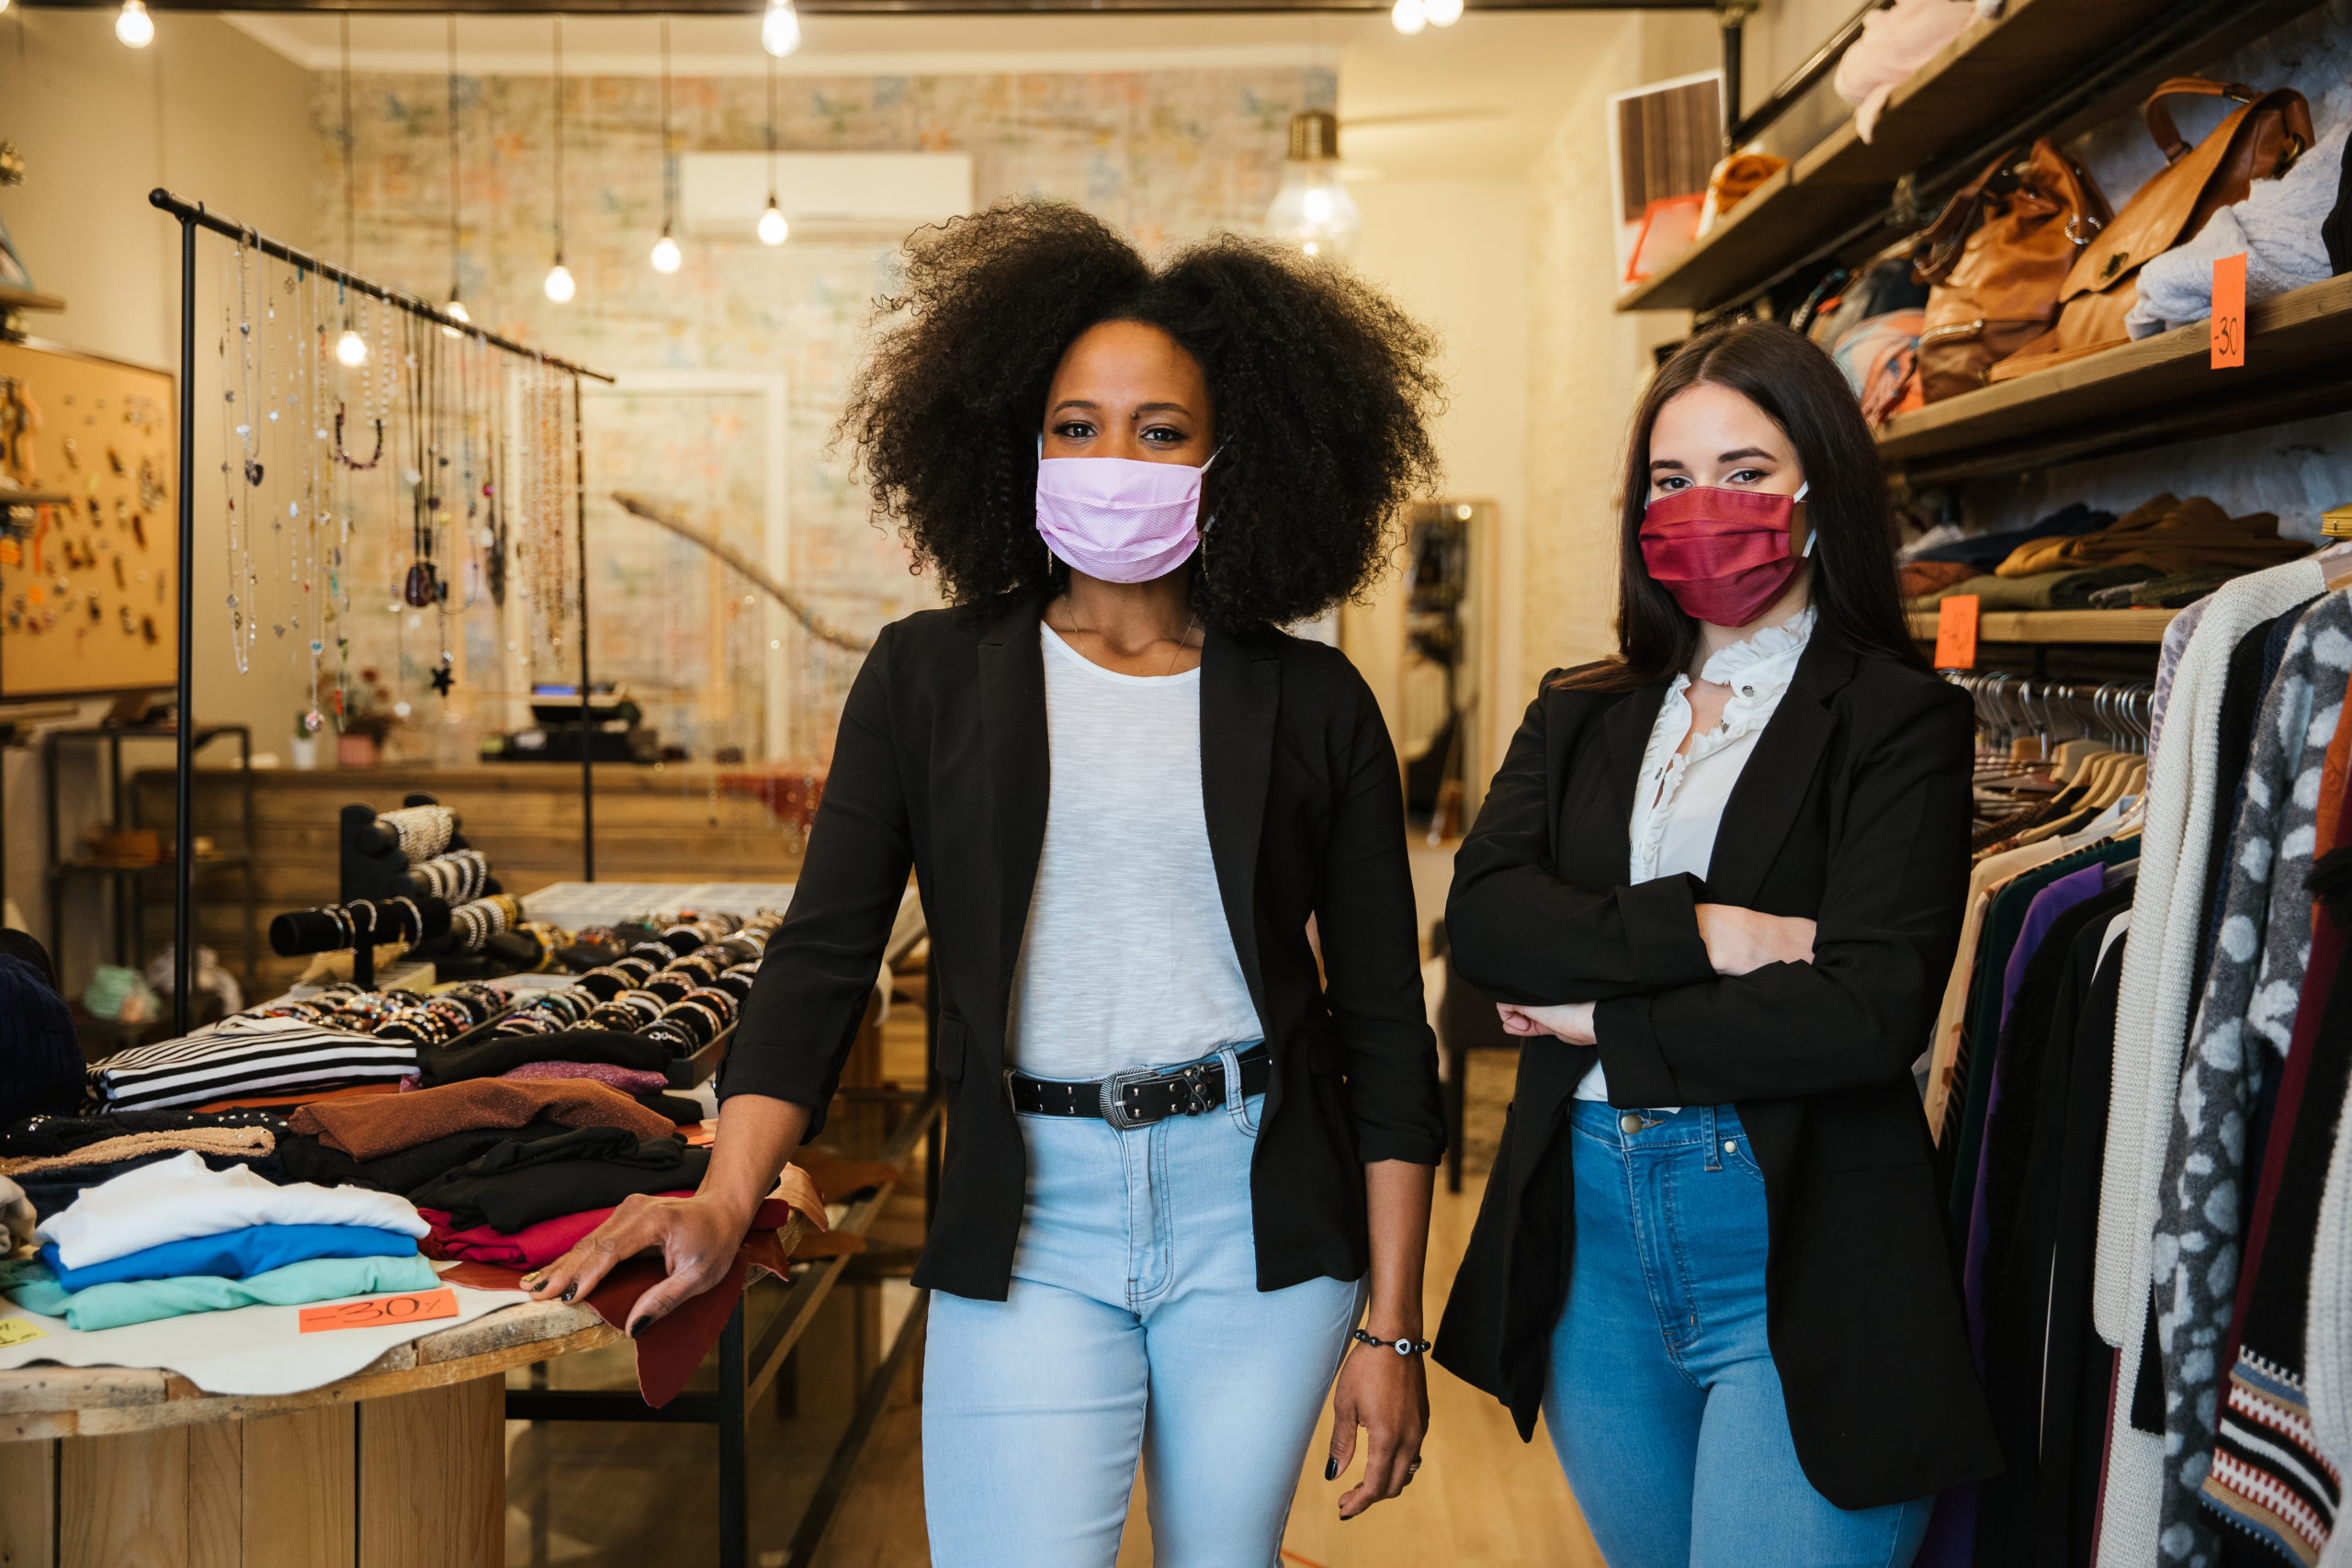 Portrait of two women owners of the clothes shop at the entrance to welcome customers during the Coronavirus Covid 19 pandemic wearing protective face masks – Millennial initiate a start up business